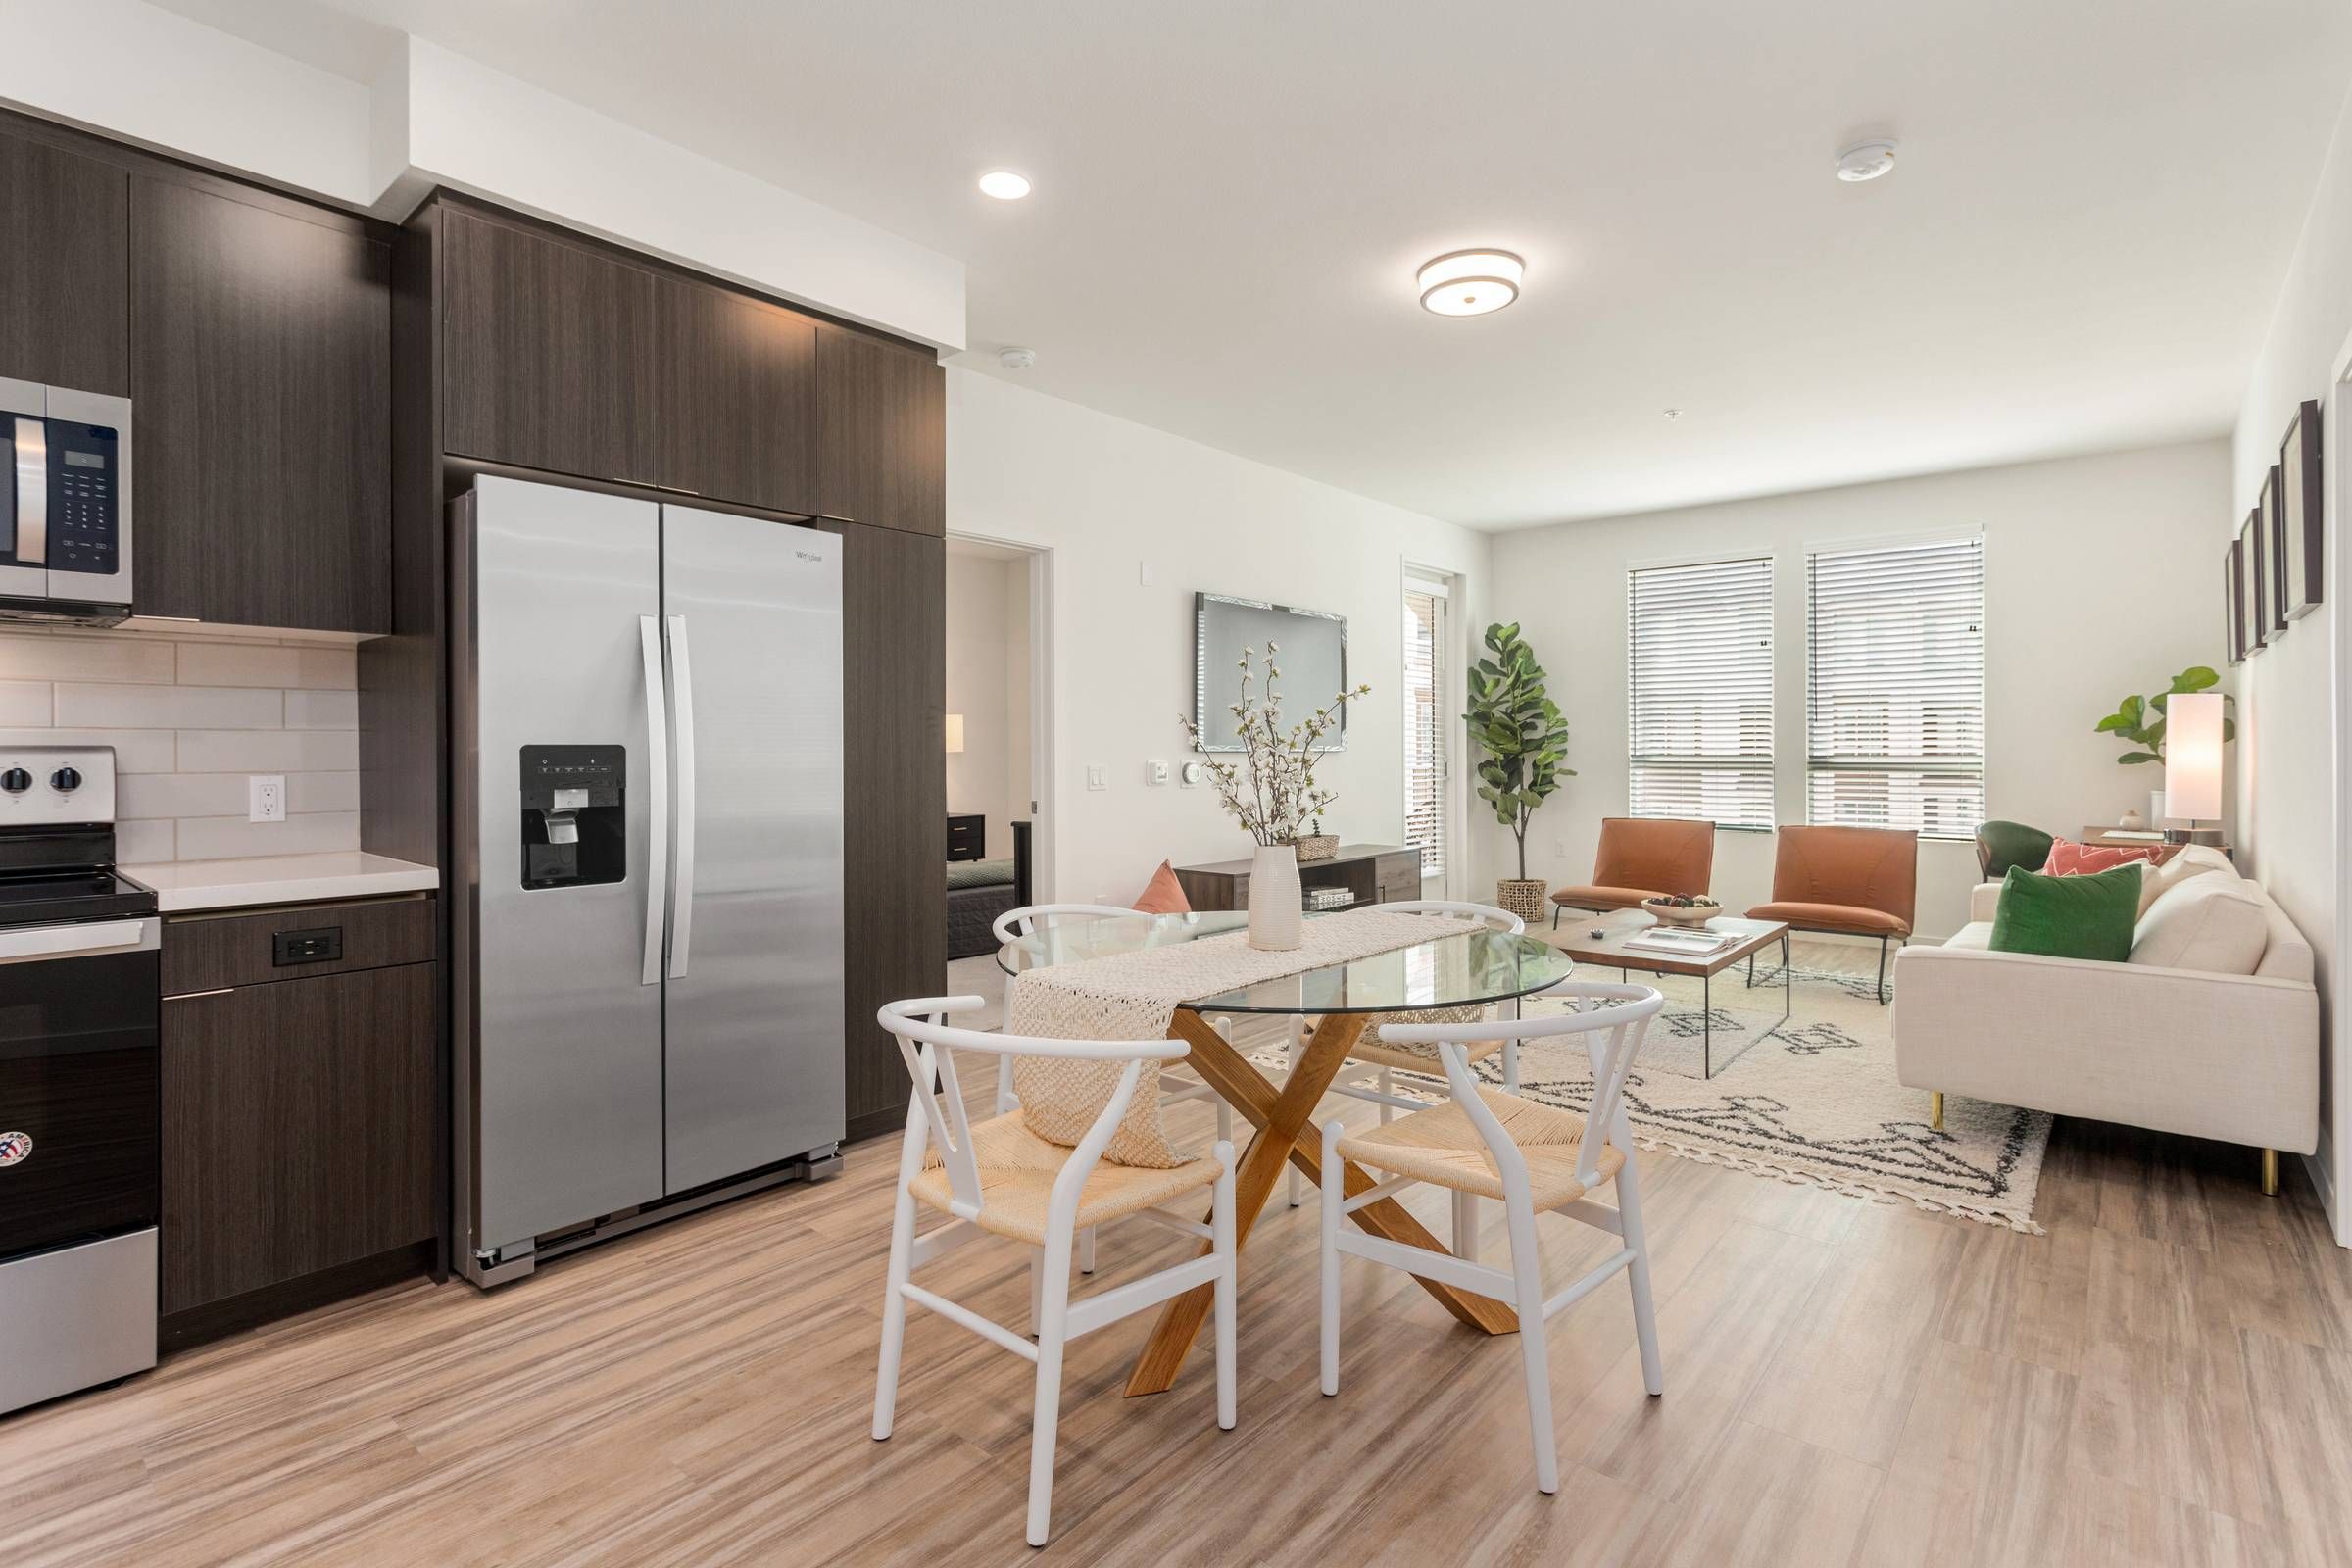 A well-appointed living space in Alta Upland includes a modern kitchen with dark wood cabinets, a round glass dining table, and a stylish living area with soft textures and neutral tones.